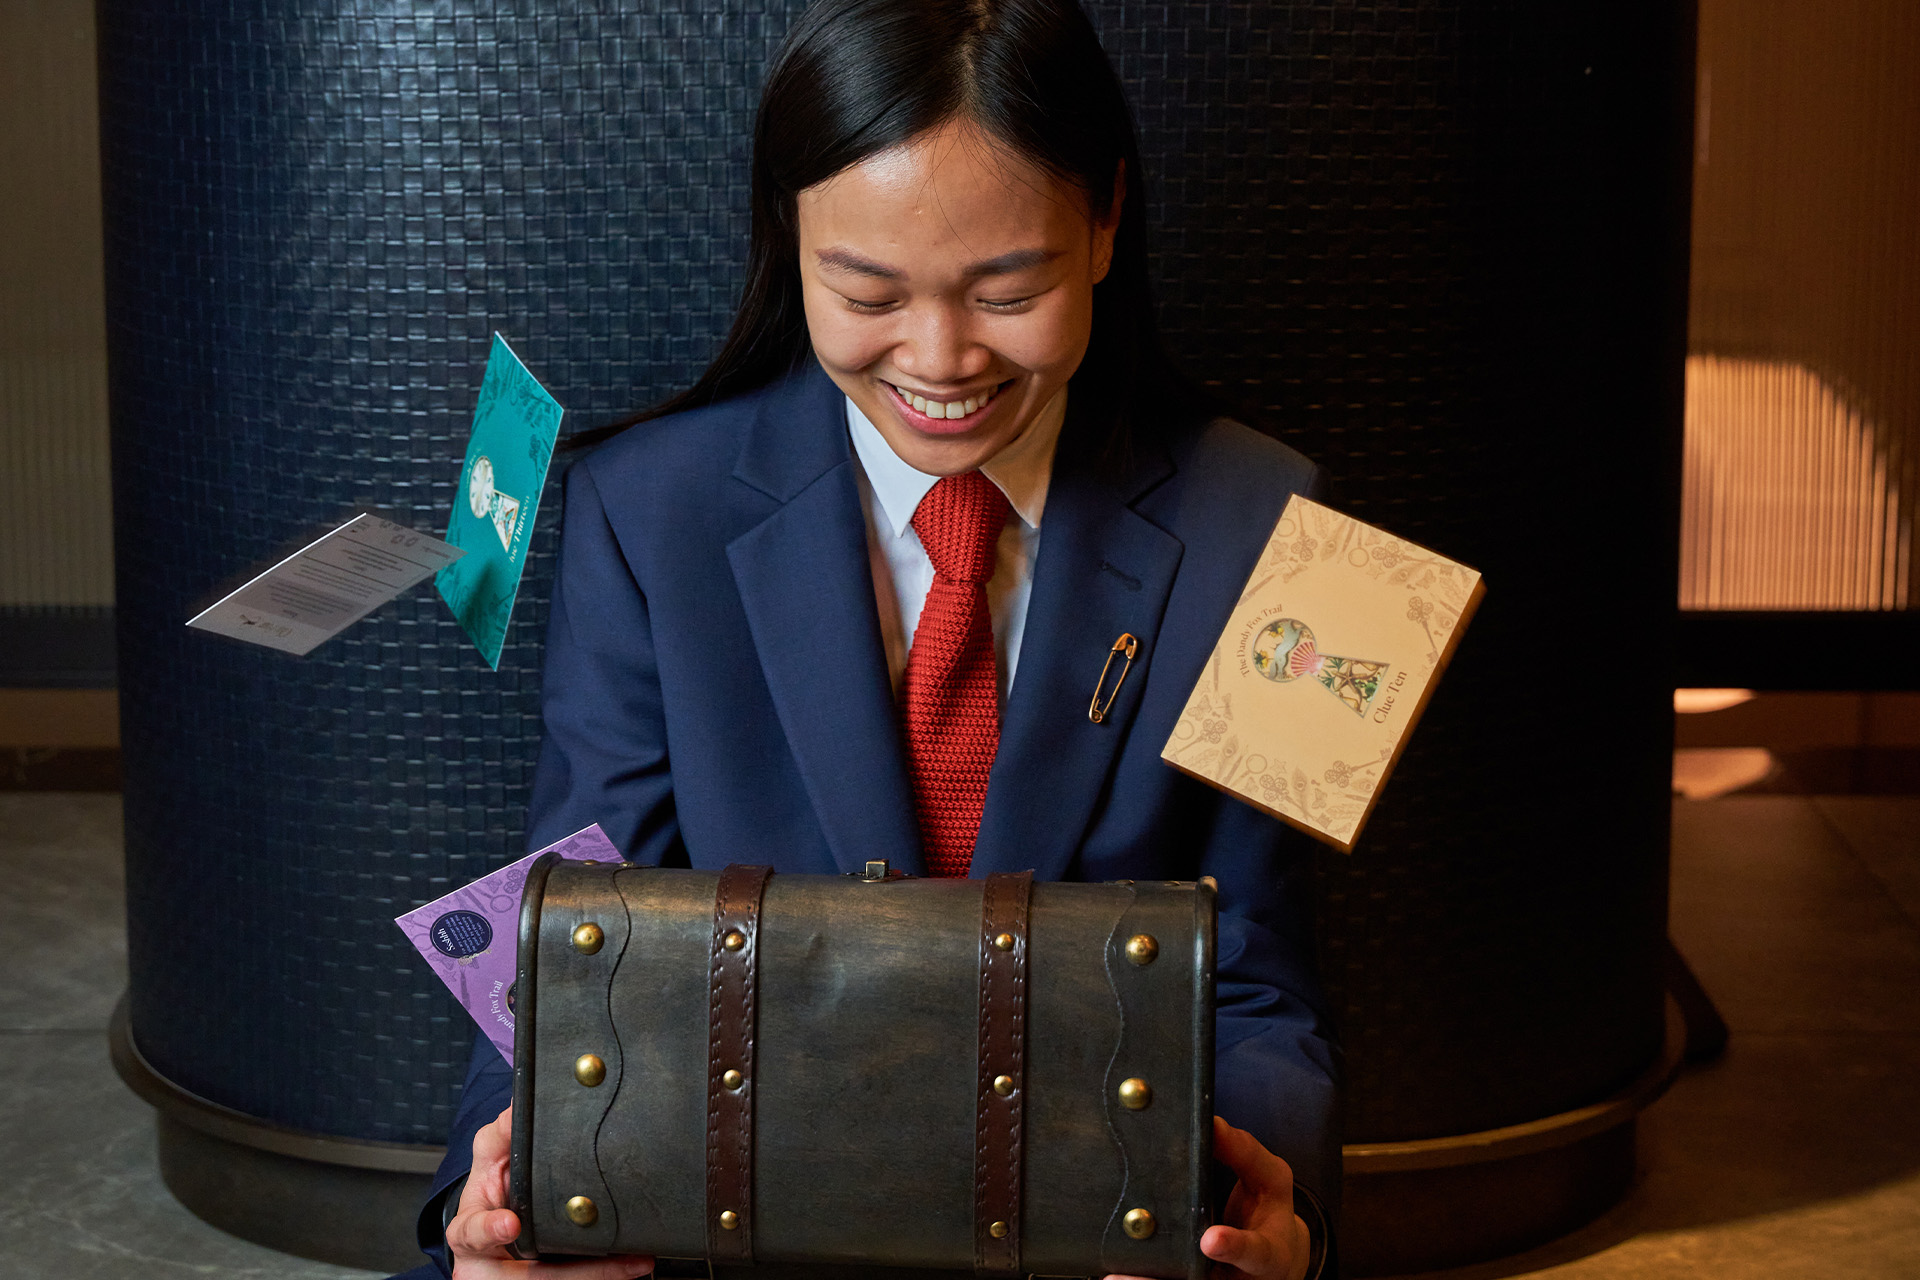 Concierge opening the box with clues